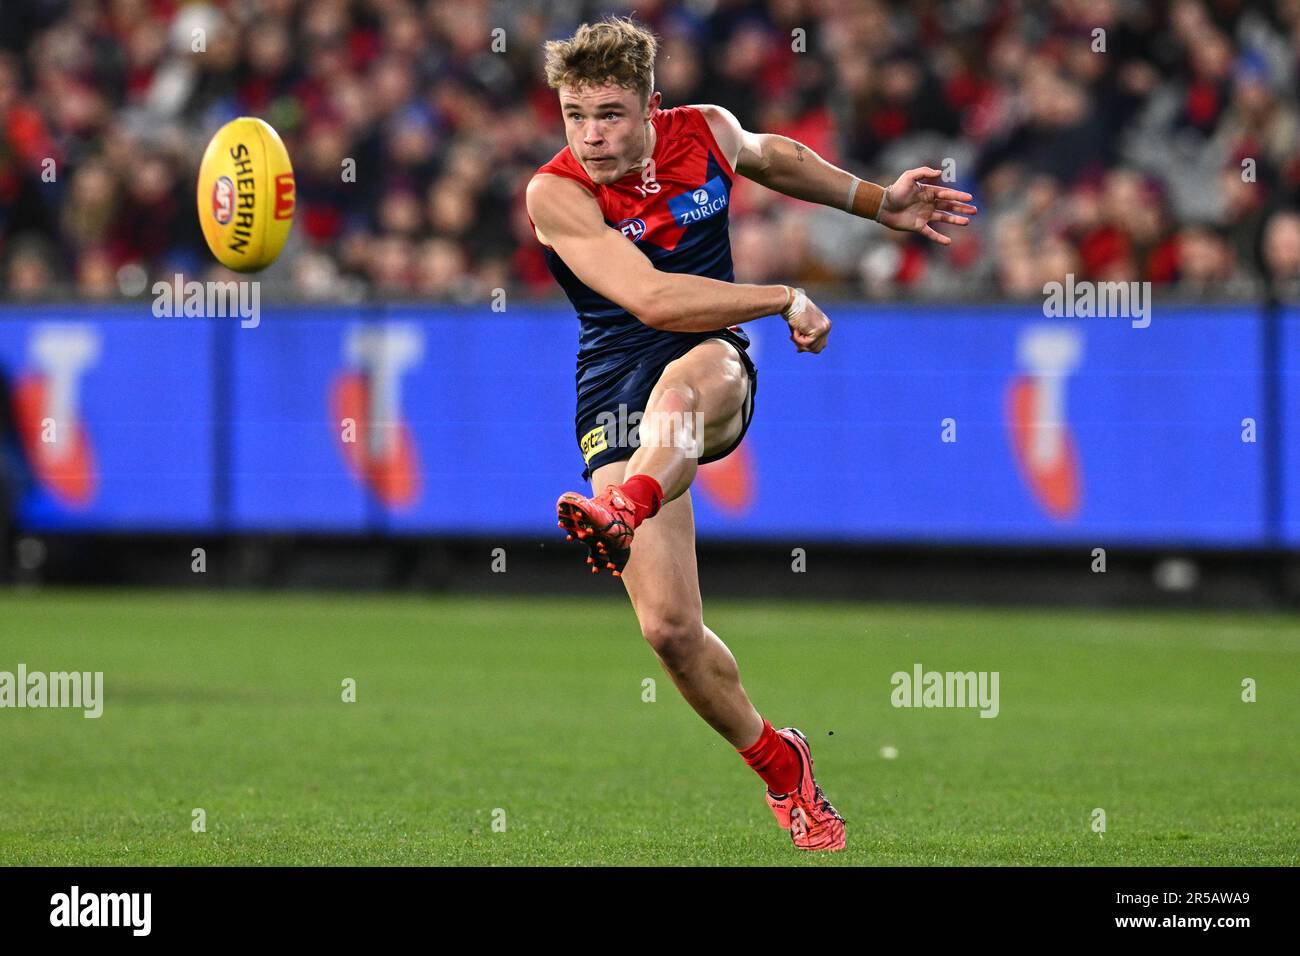 Snapshot of round 12 in the 2023 AFL season